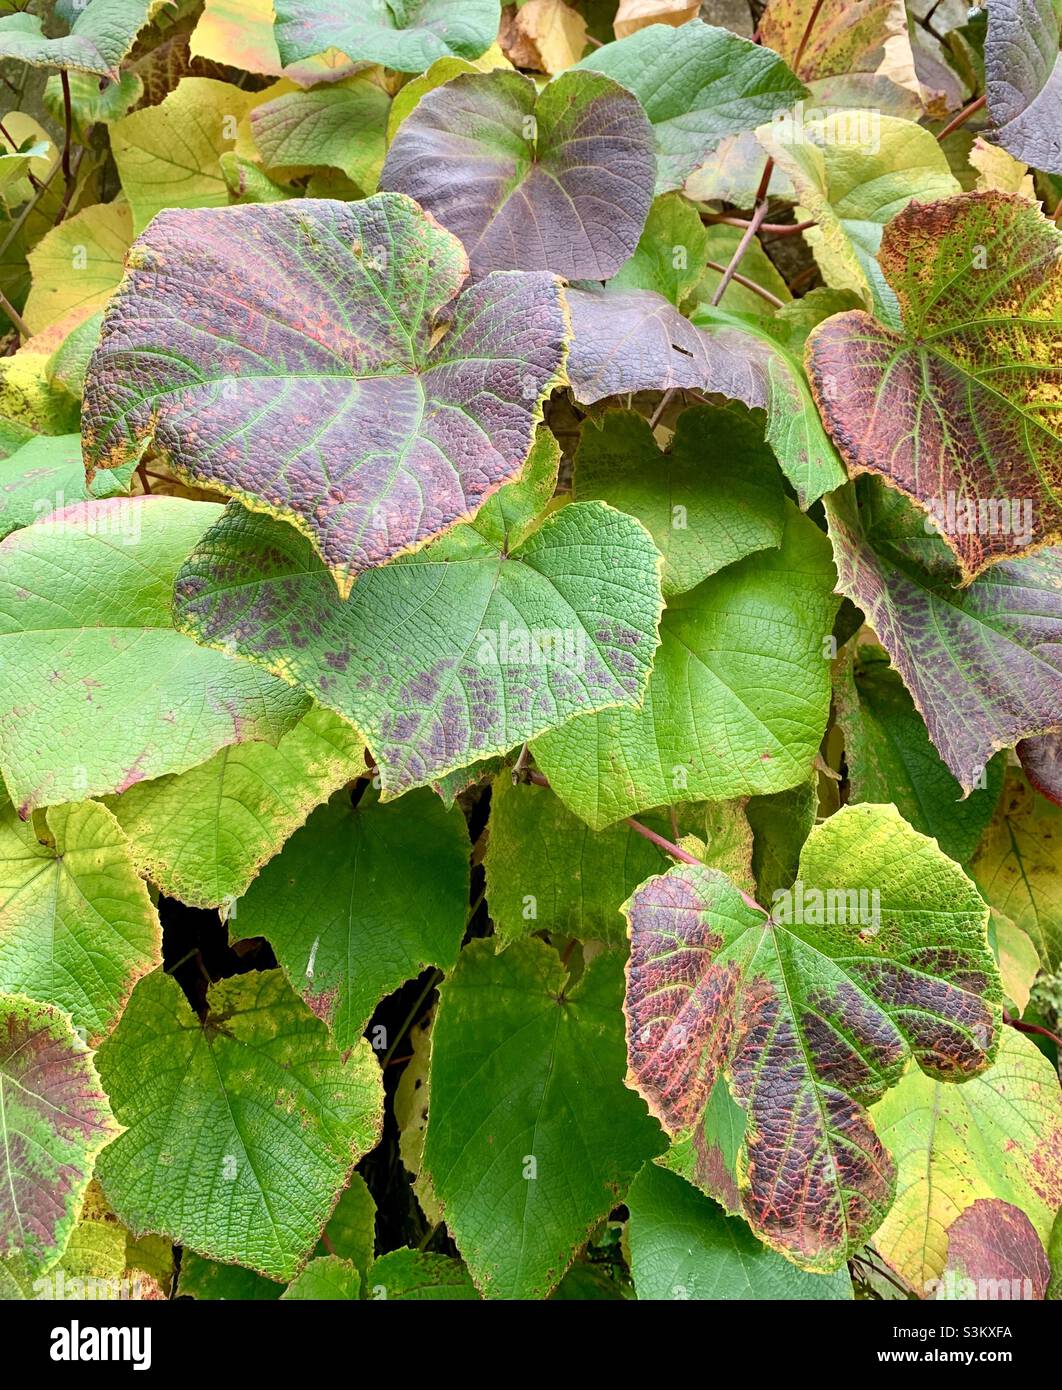 Beautiful green and red variegated leaves Stock Photo